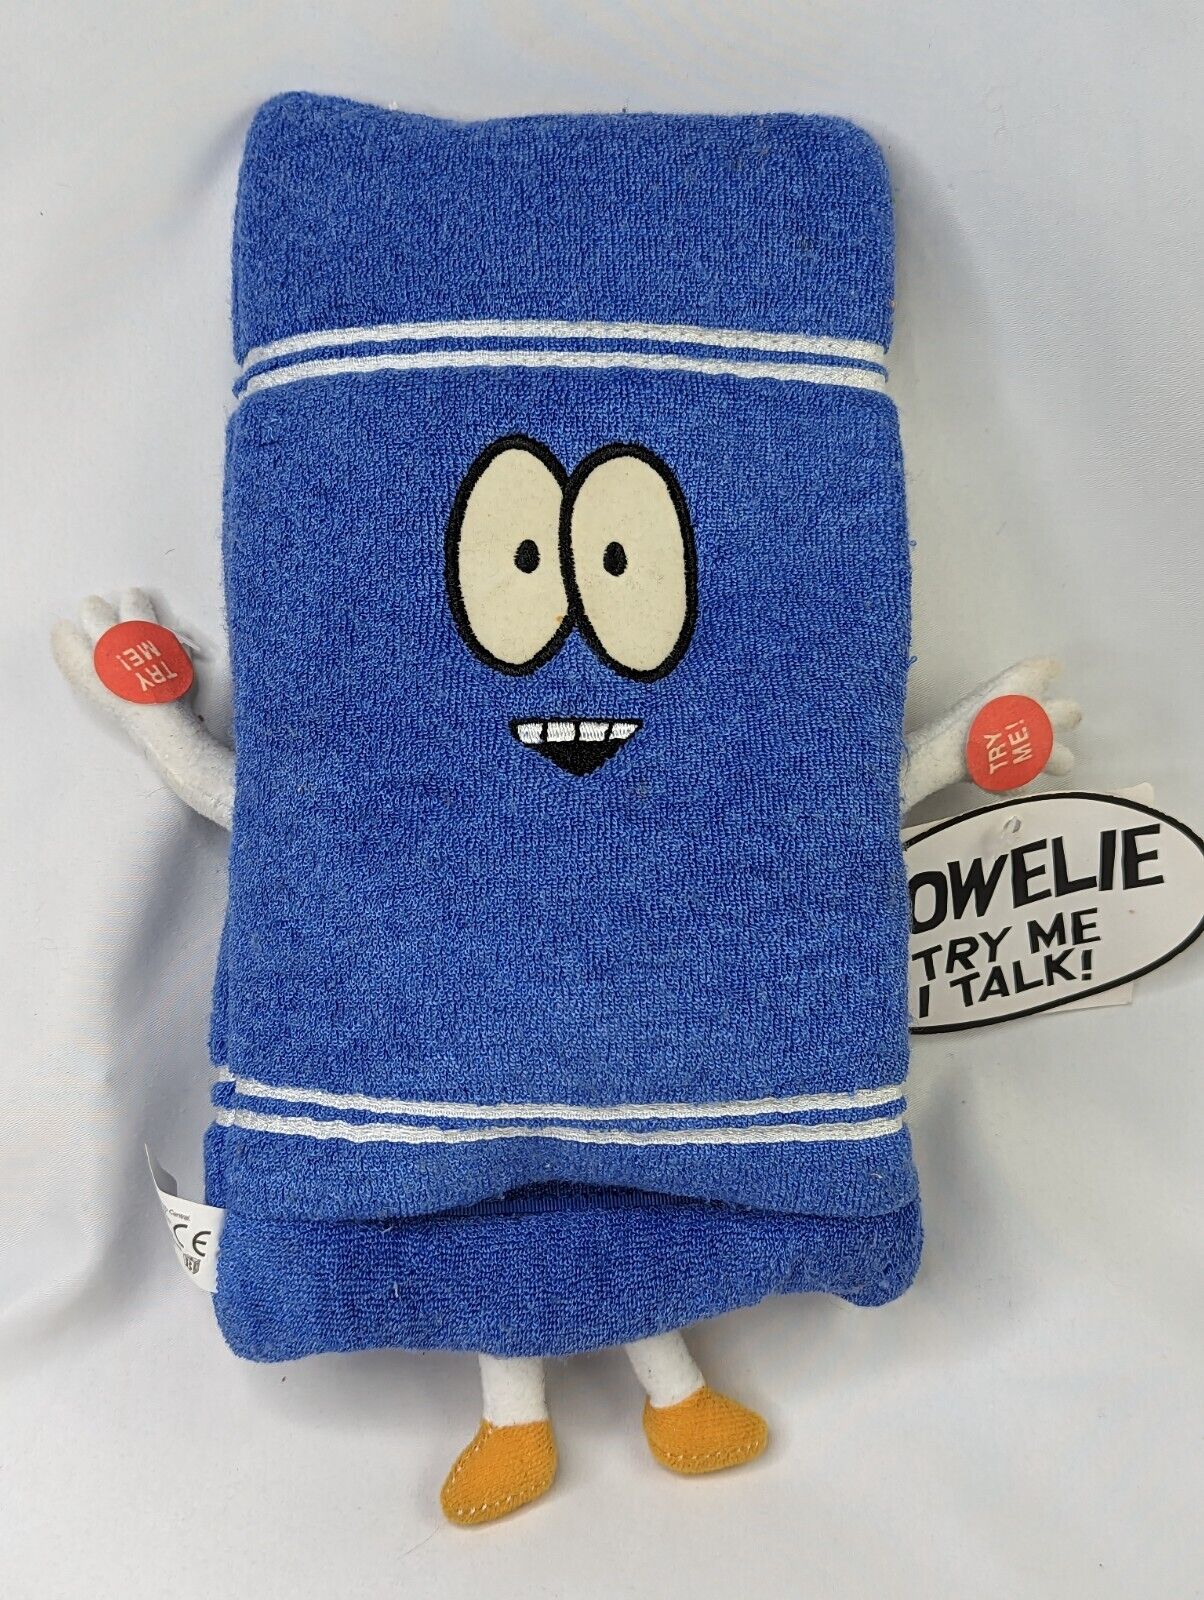 South Park Towel Plush Talks Towelie 10 Inch 2002 Comedy Central Works Stuffed